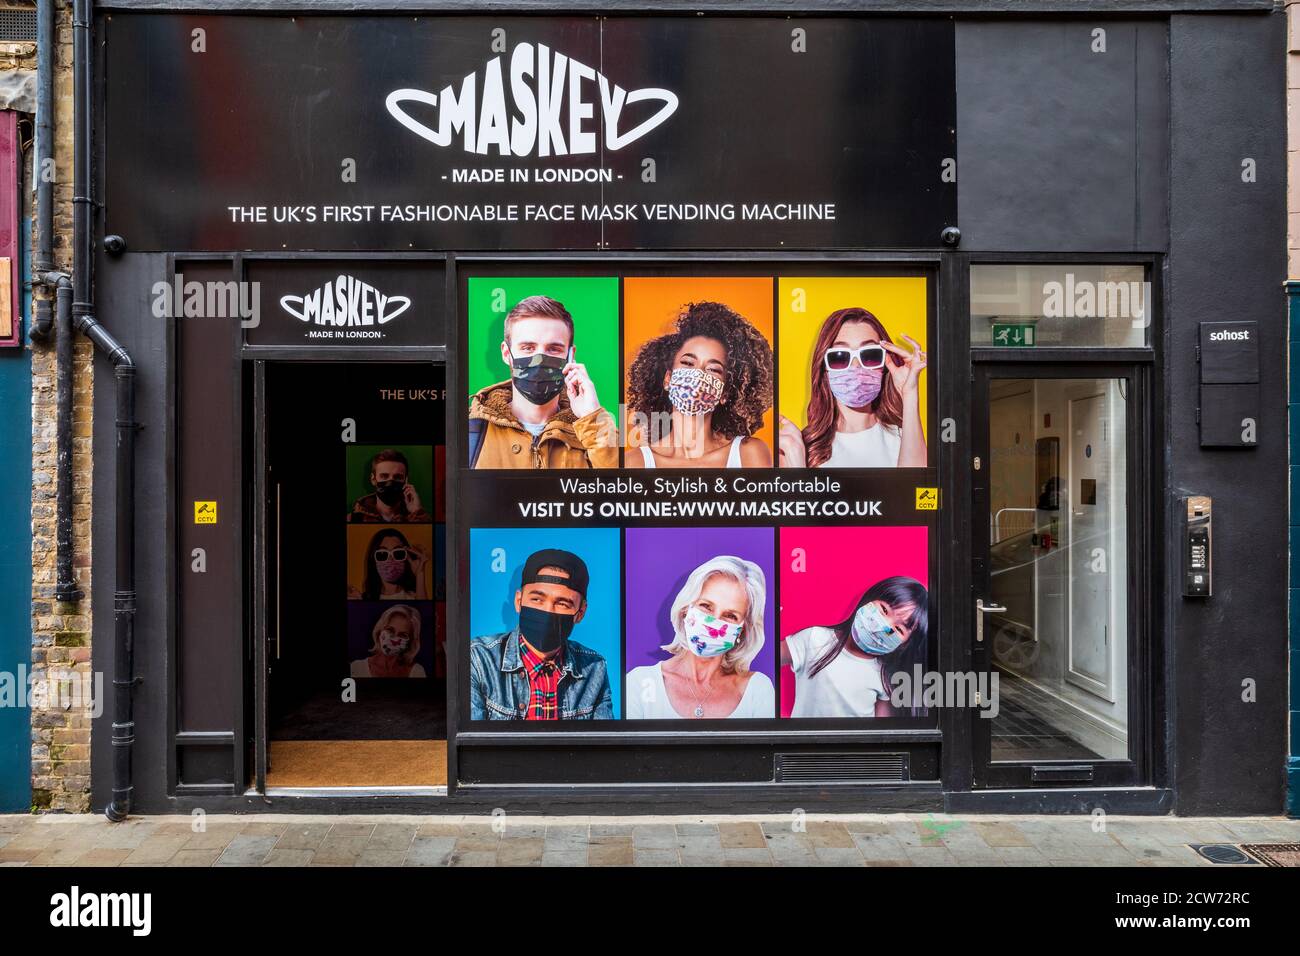 Makey Face Mask Store on Berwick Street in Soho London - example of a Covid-19 Pandemic Business Opportunity. Stock Photo